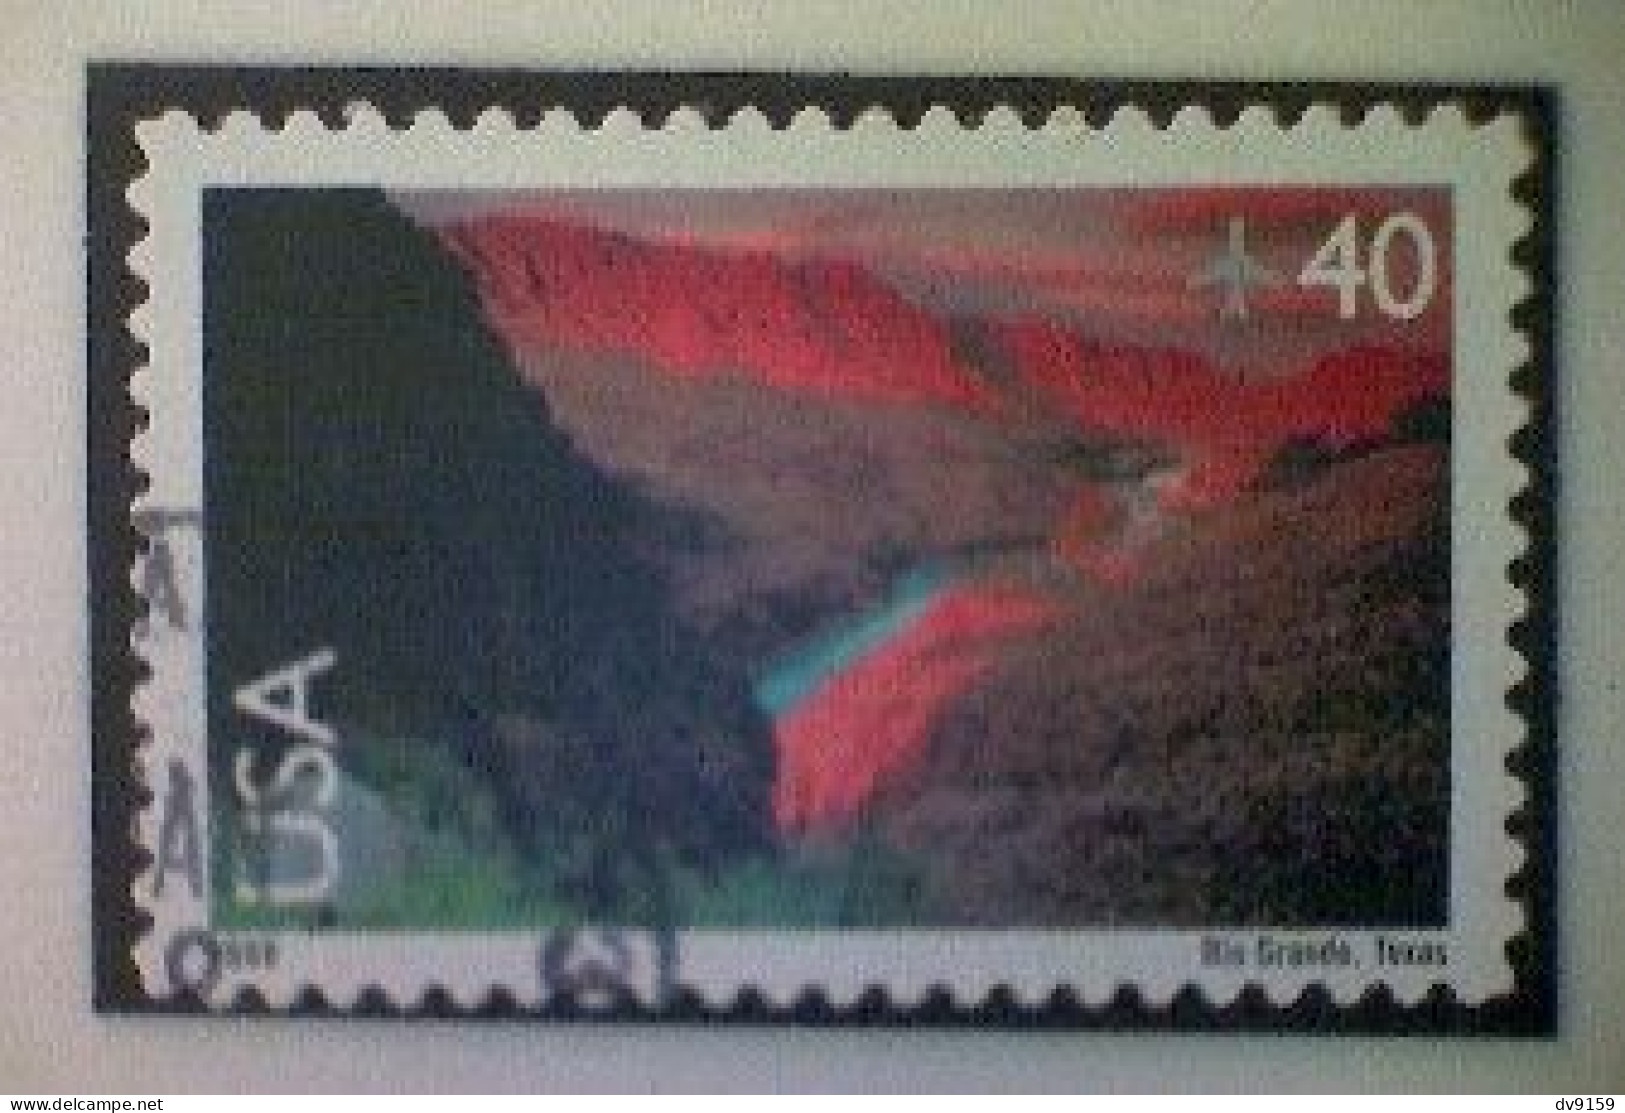 United States, Scott #C134, Used(o) Air Mail, 1999, Rio Grande Valley, 40¢ - Used Stamps